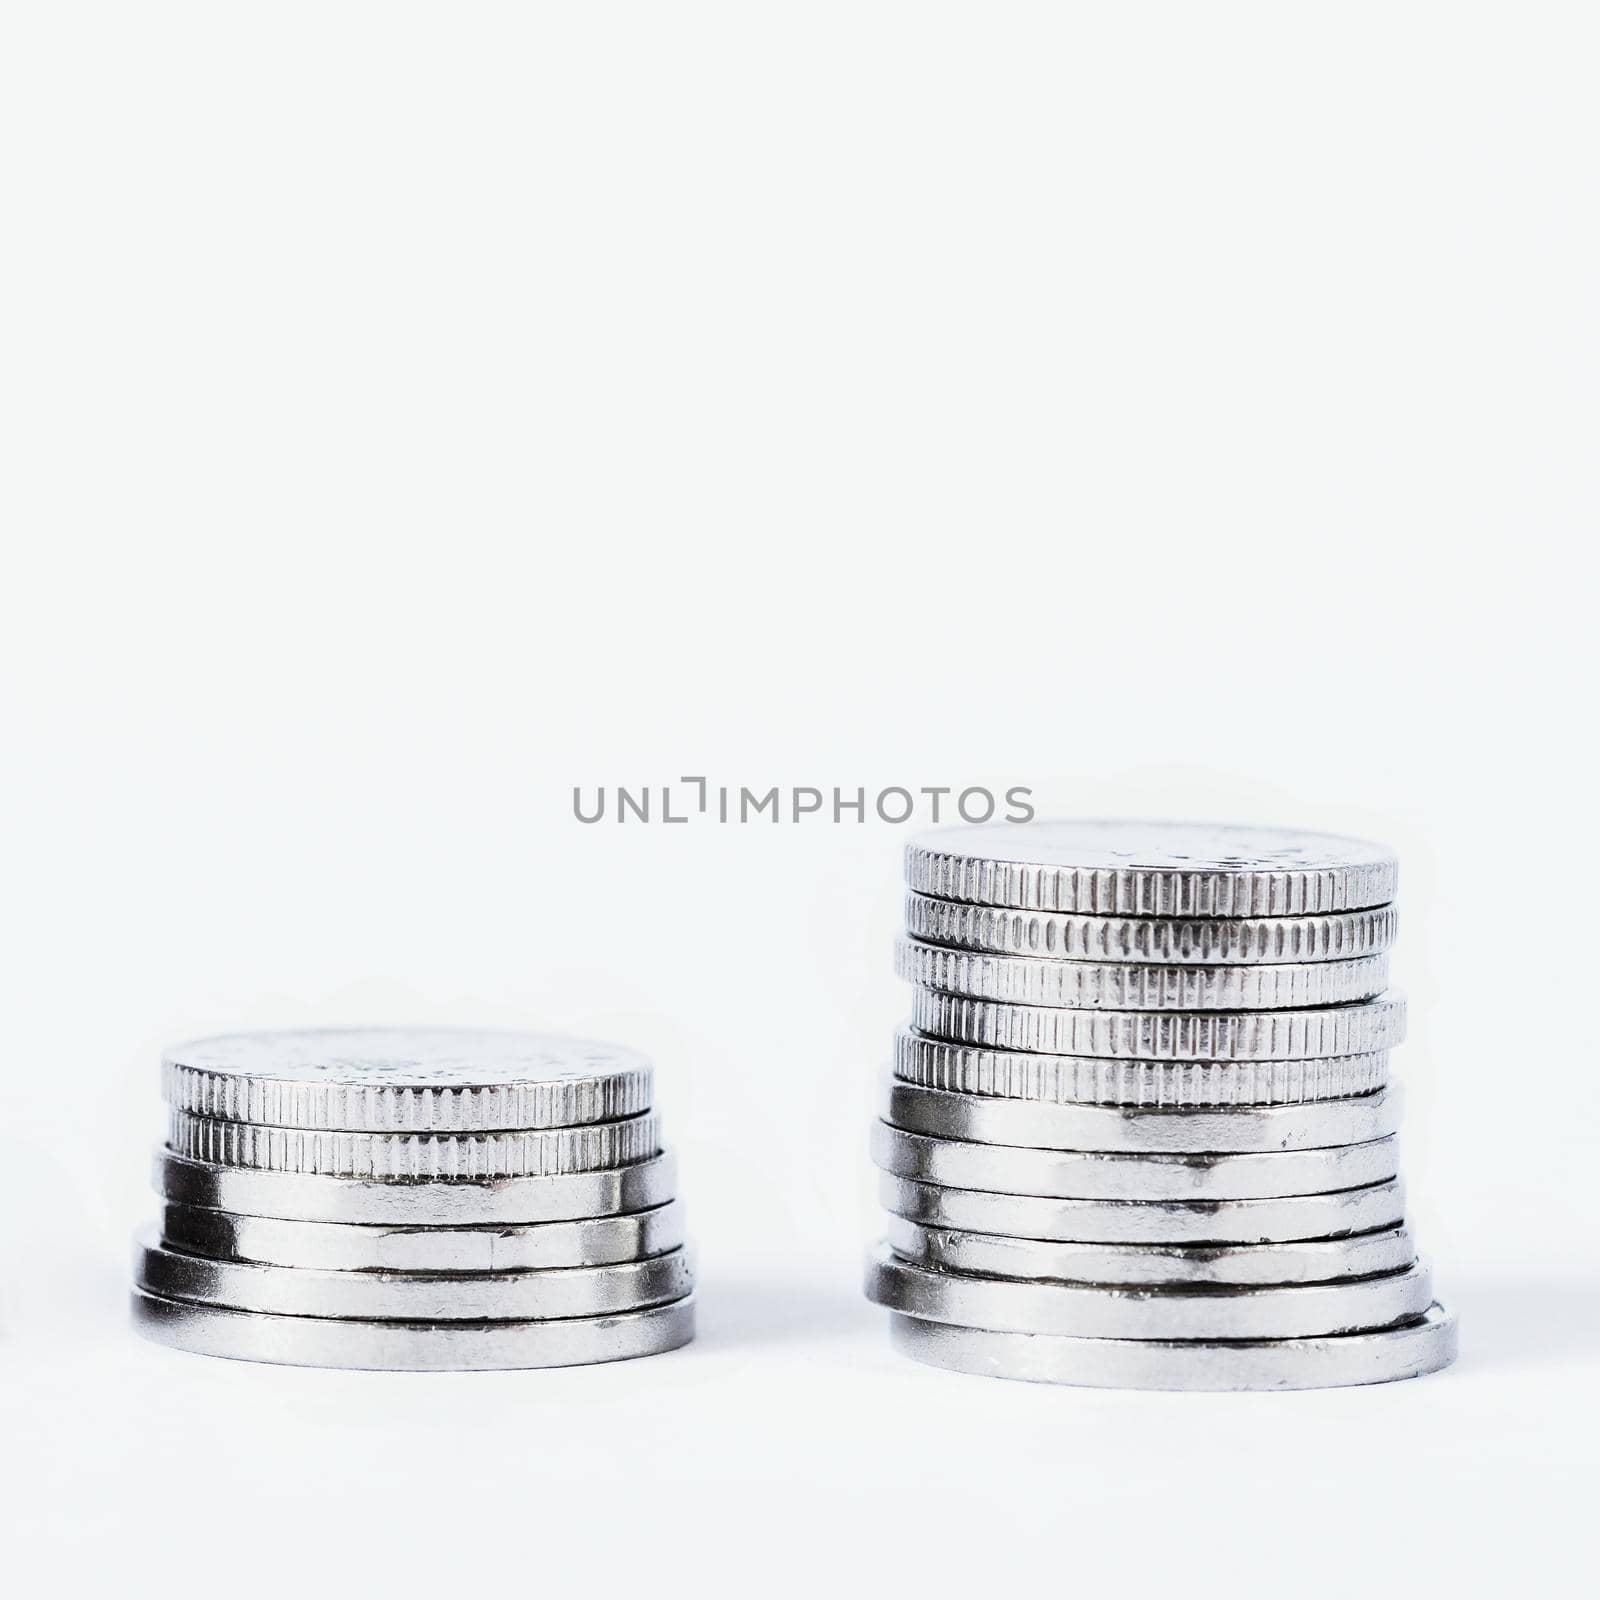 Small money - coins. Czech crown.Isolated on a clean white background